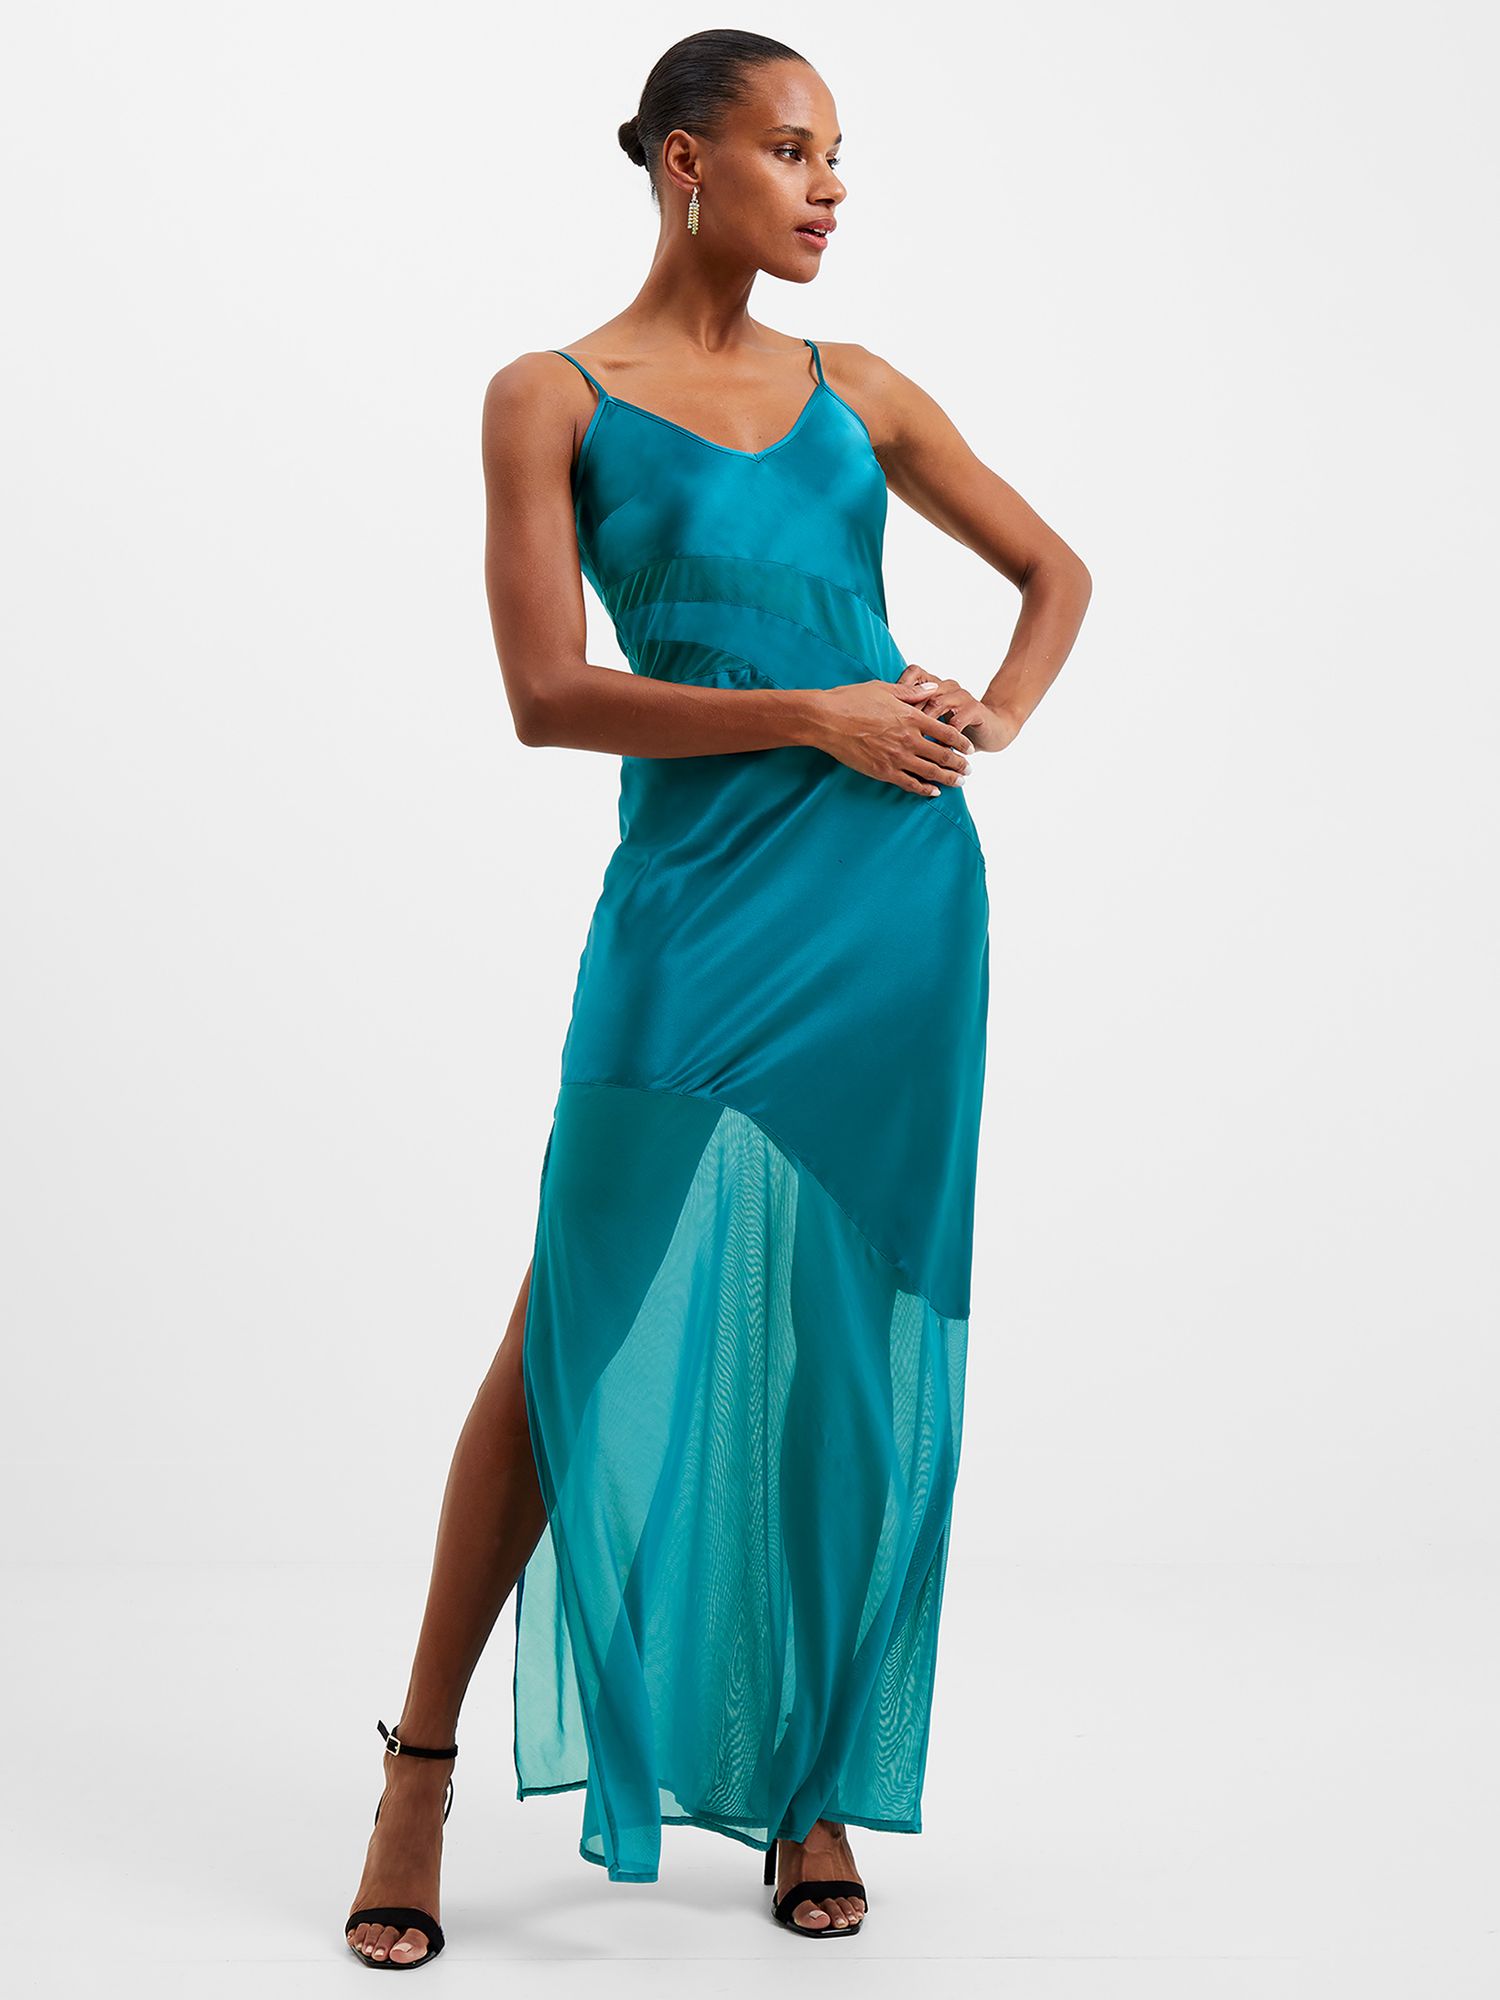 French Connection Inu Satin Strappy Split Maxi Dress, Ocean Blue